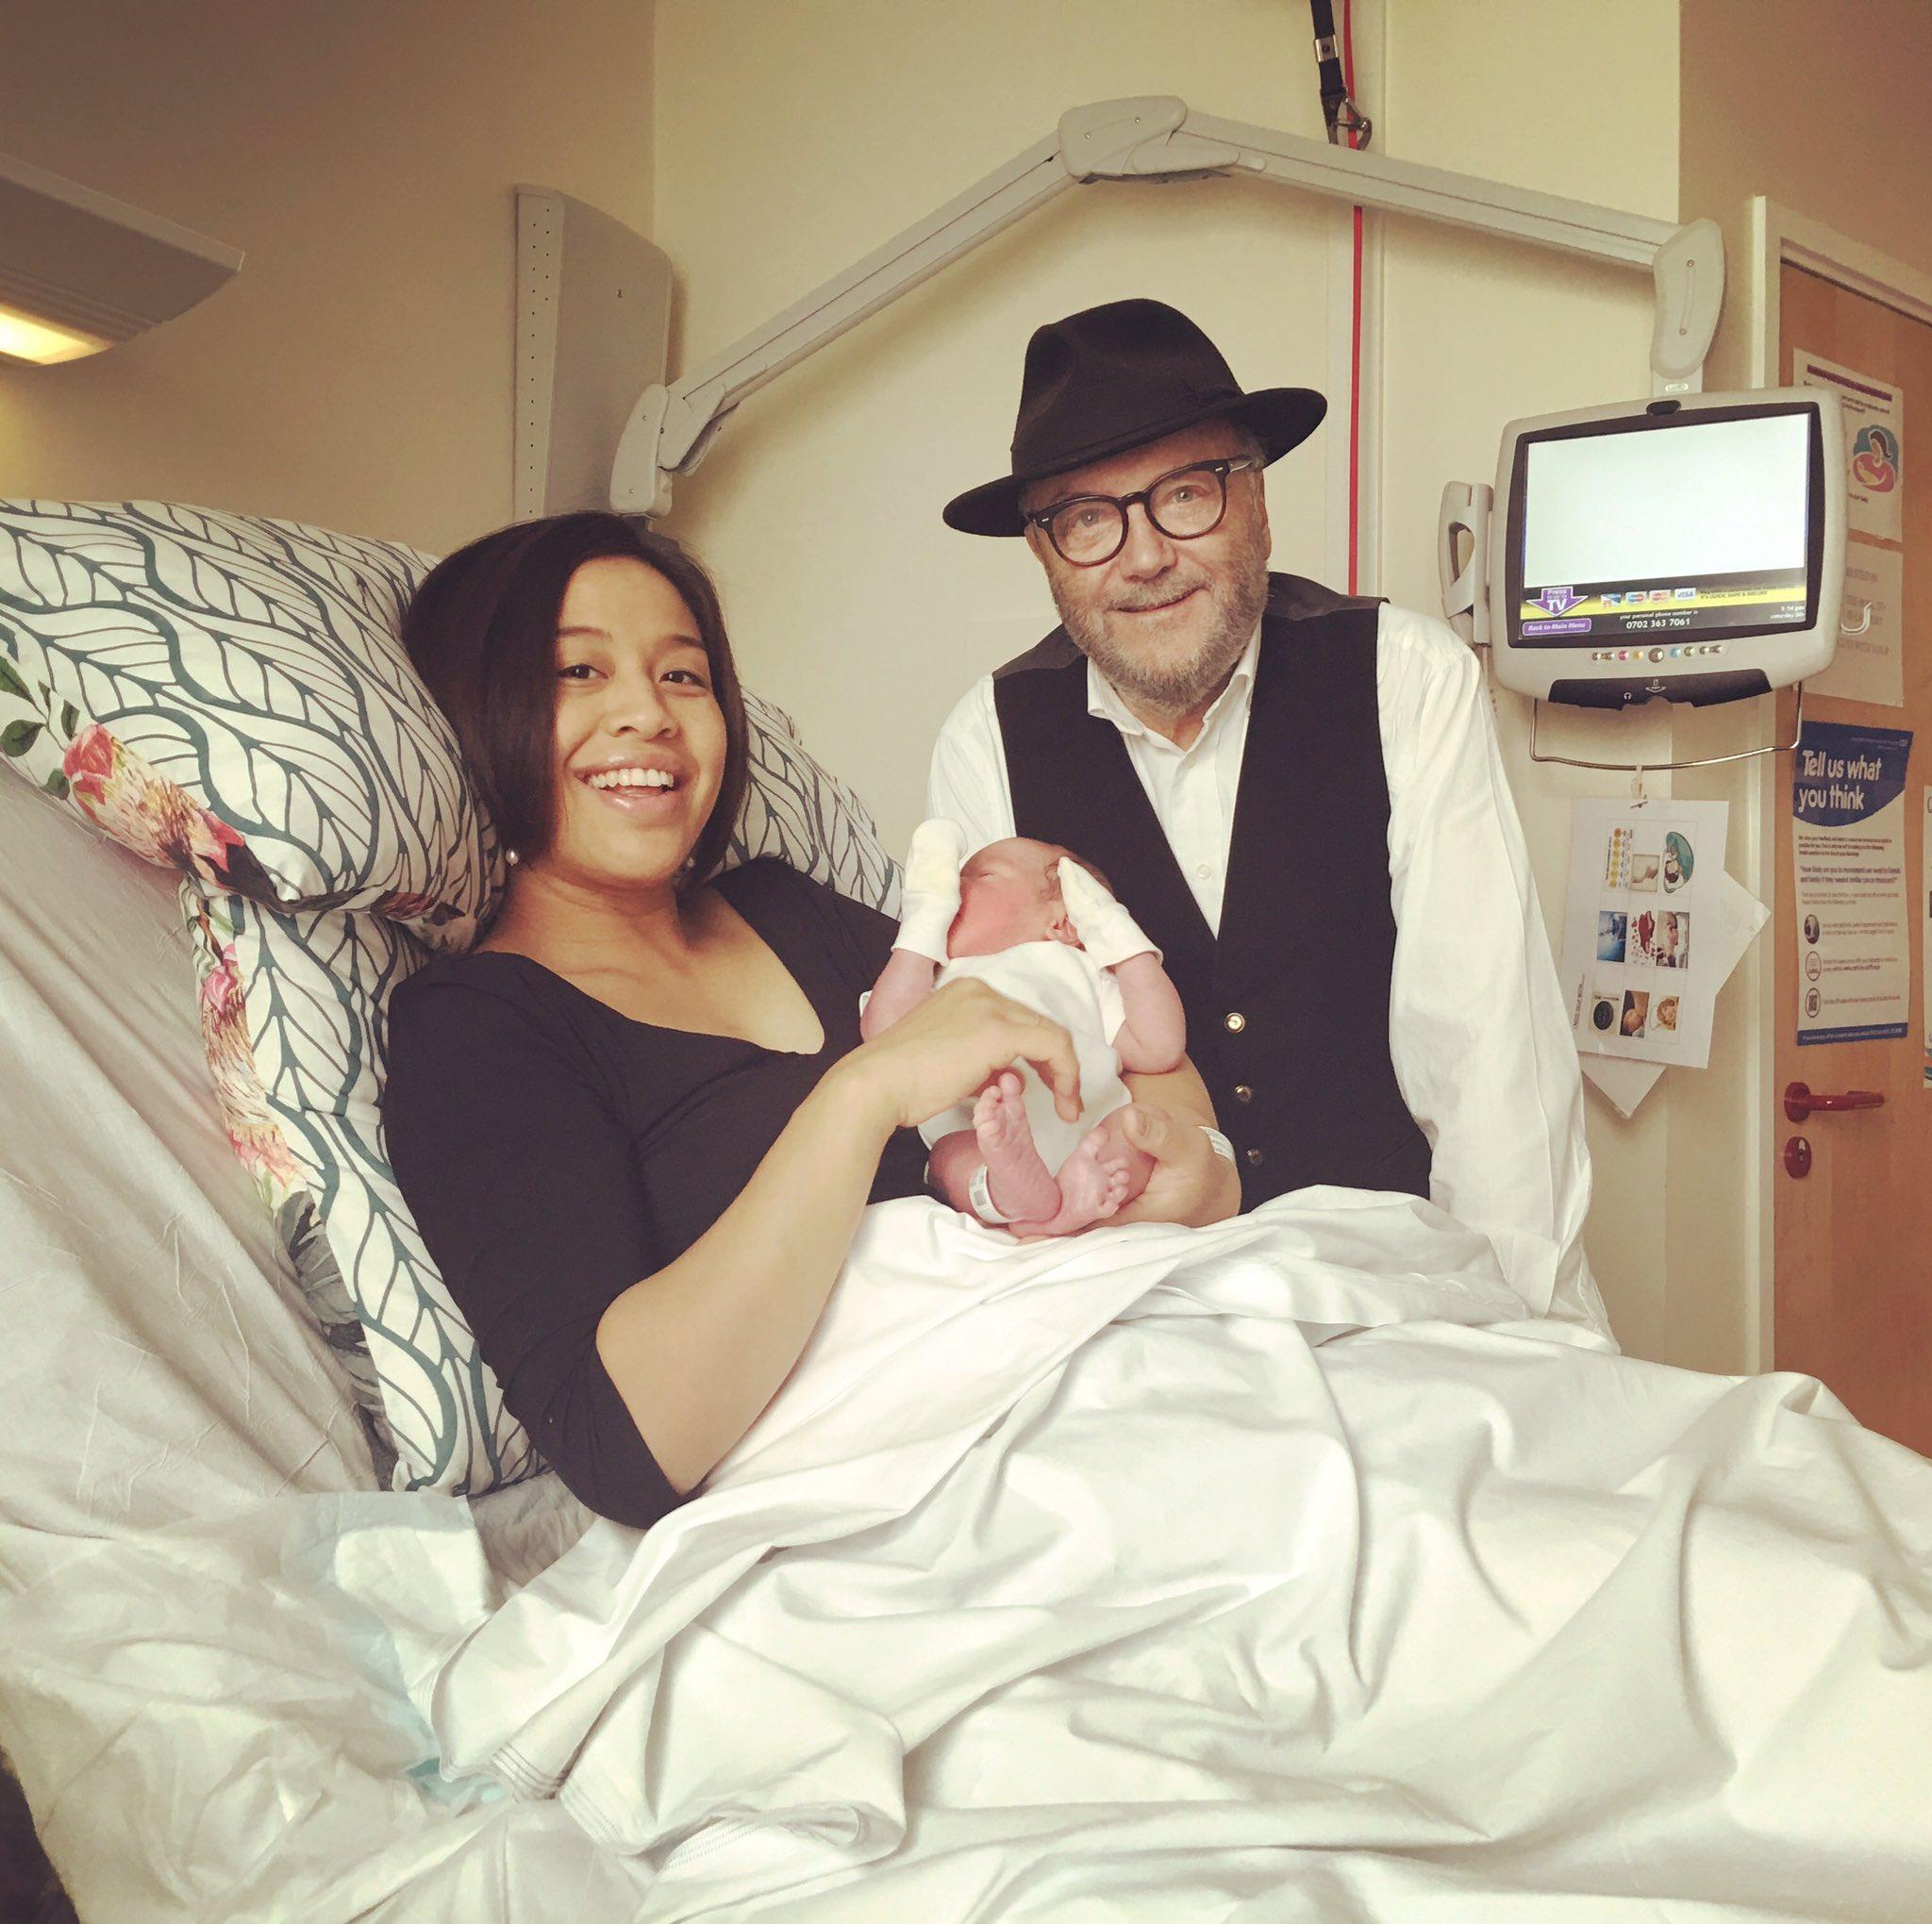 Baby Orlá is welcomed into the world by Mr Galloway and his wife Putri